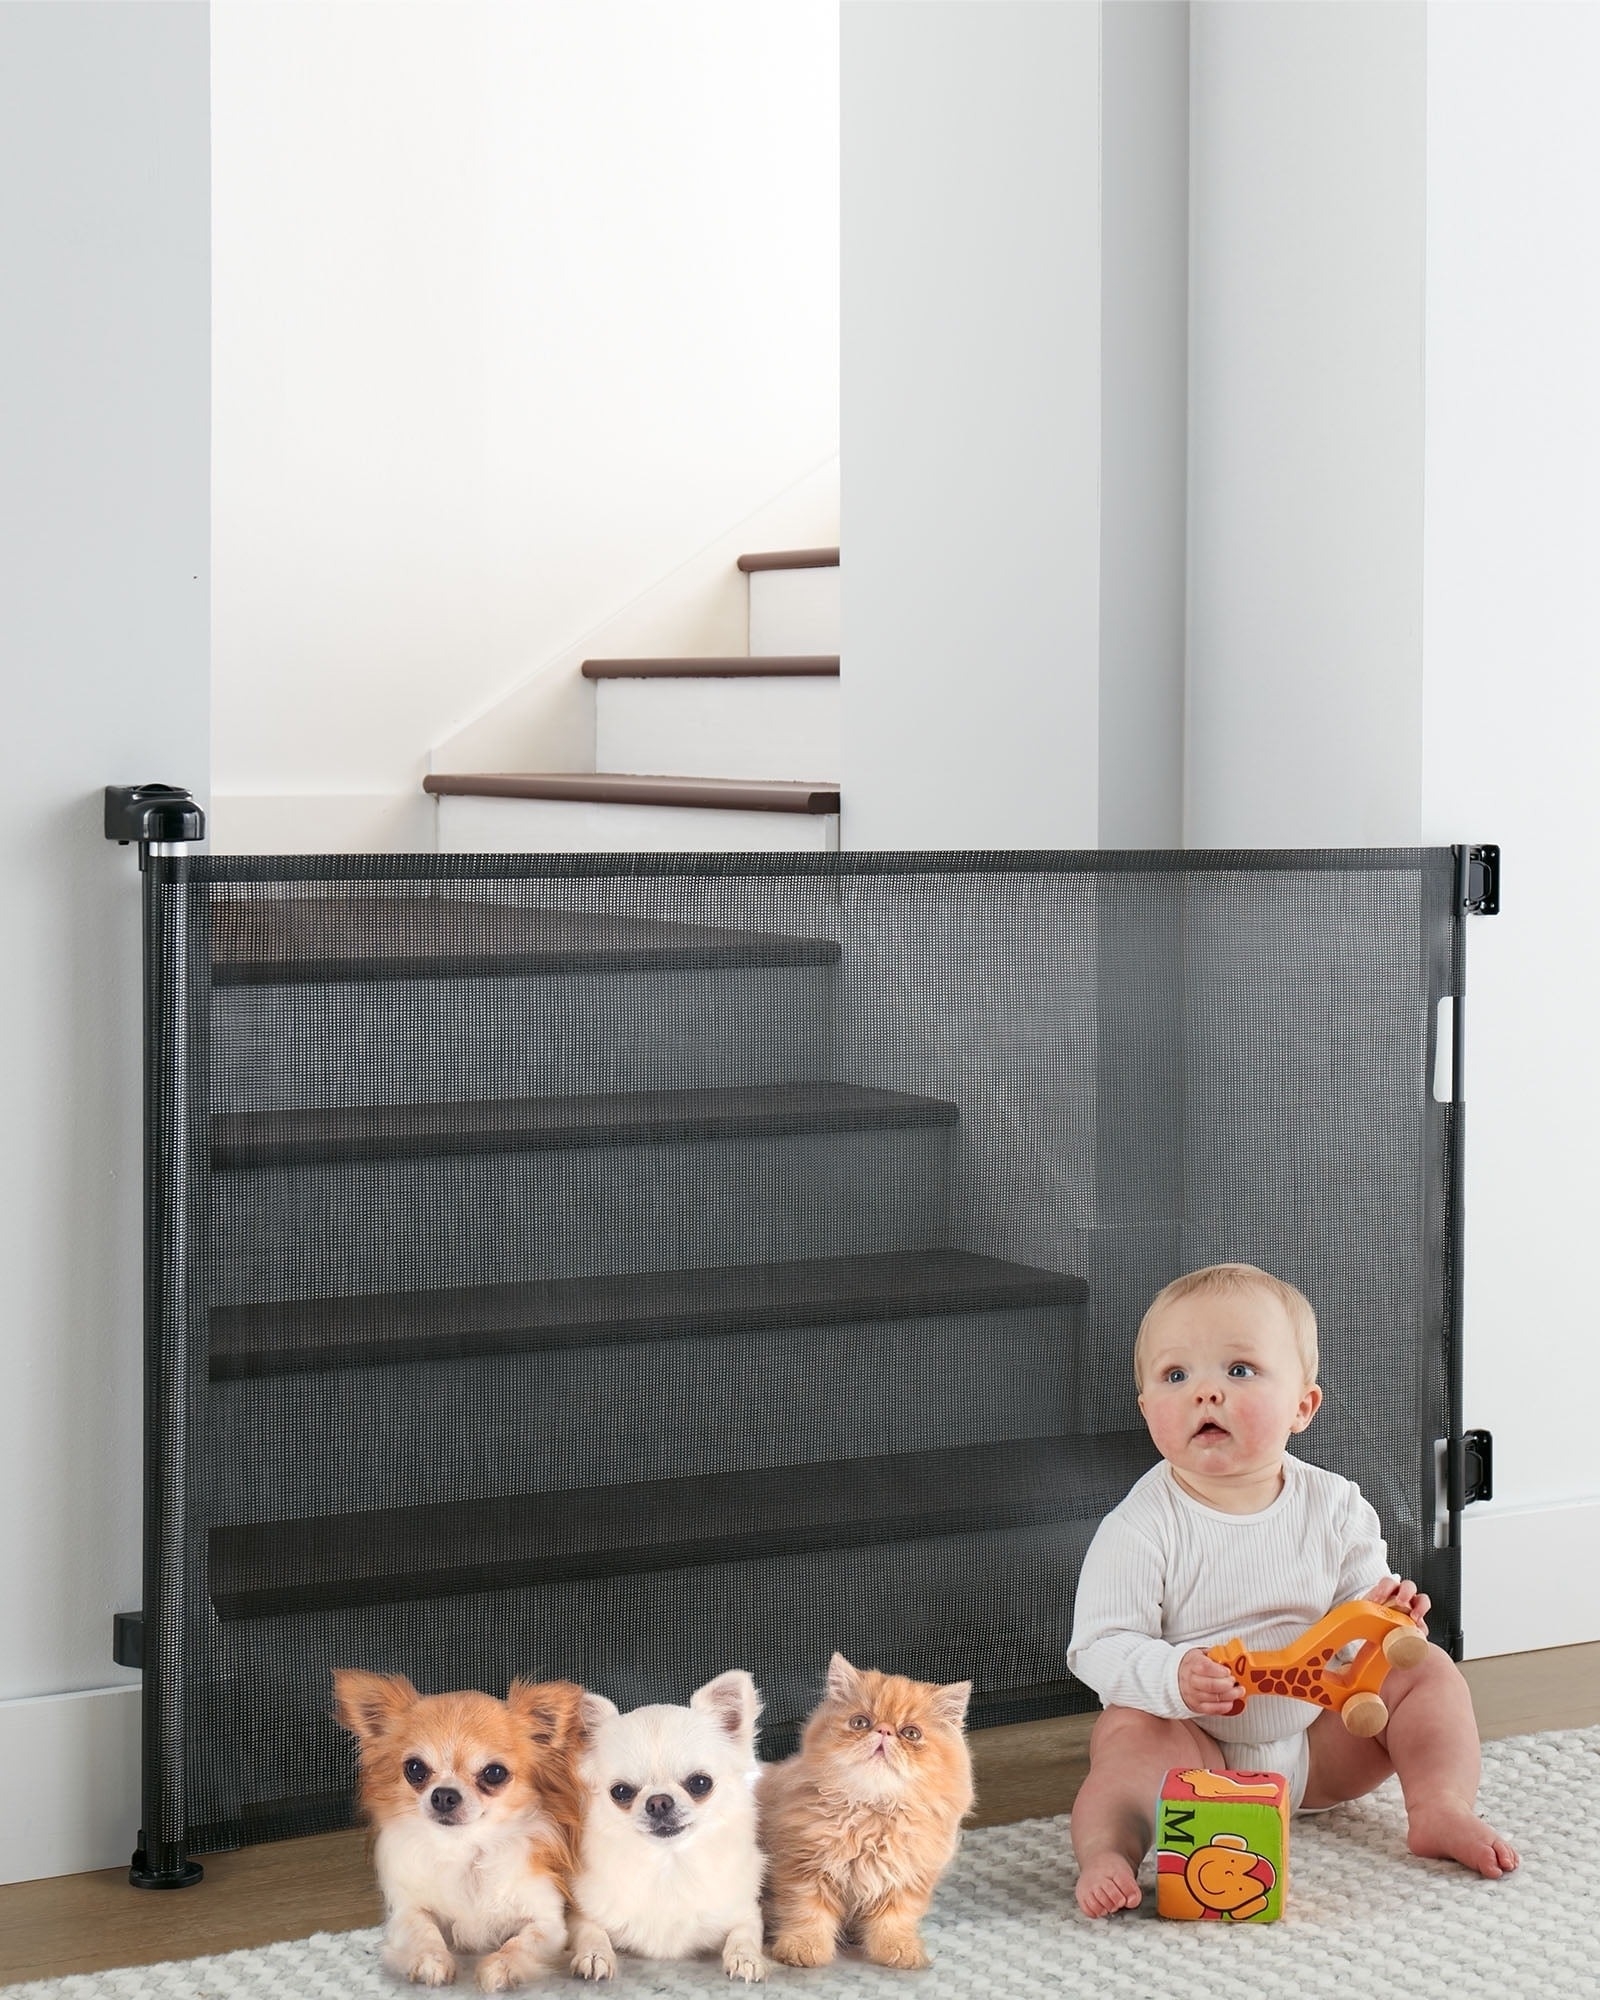 A baby and pets sit in front of a baby gate